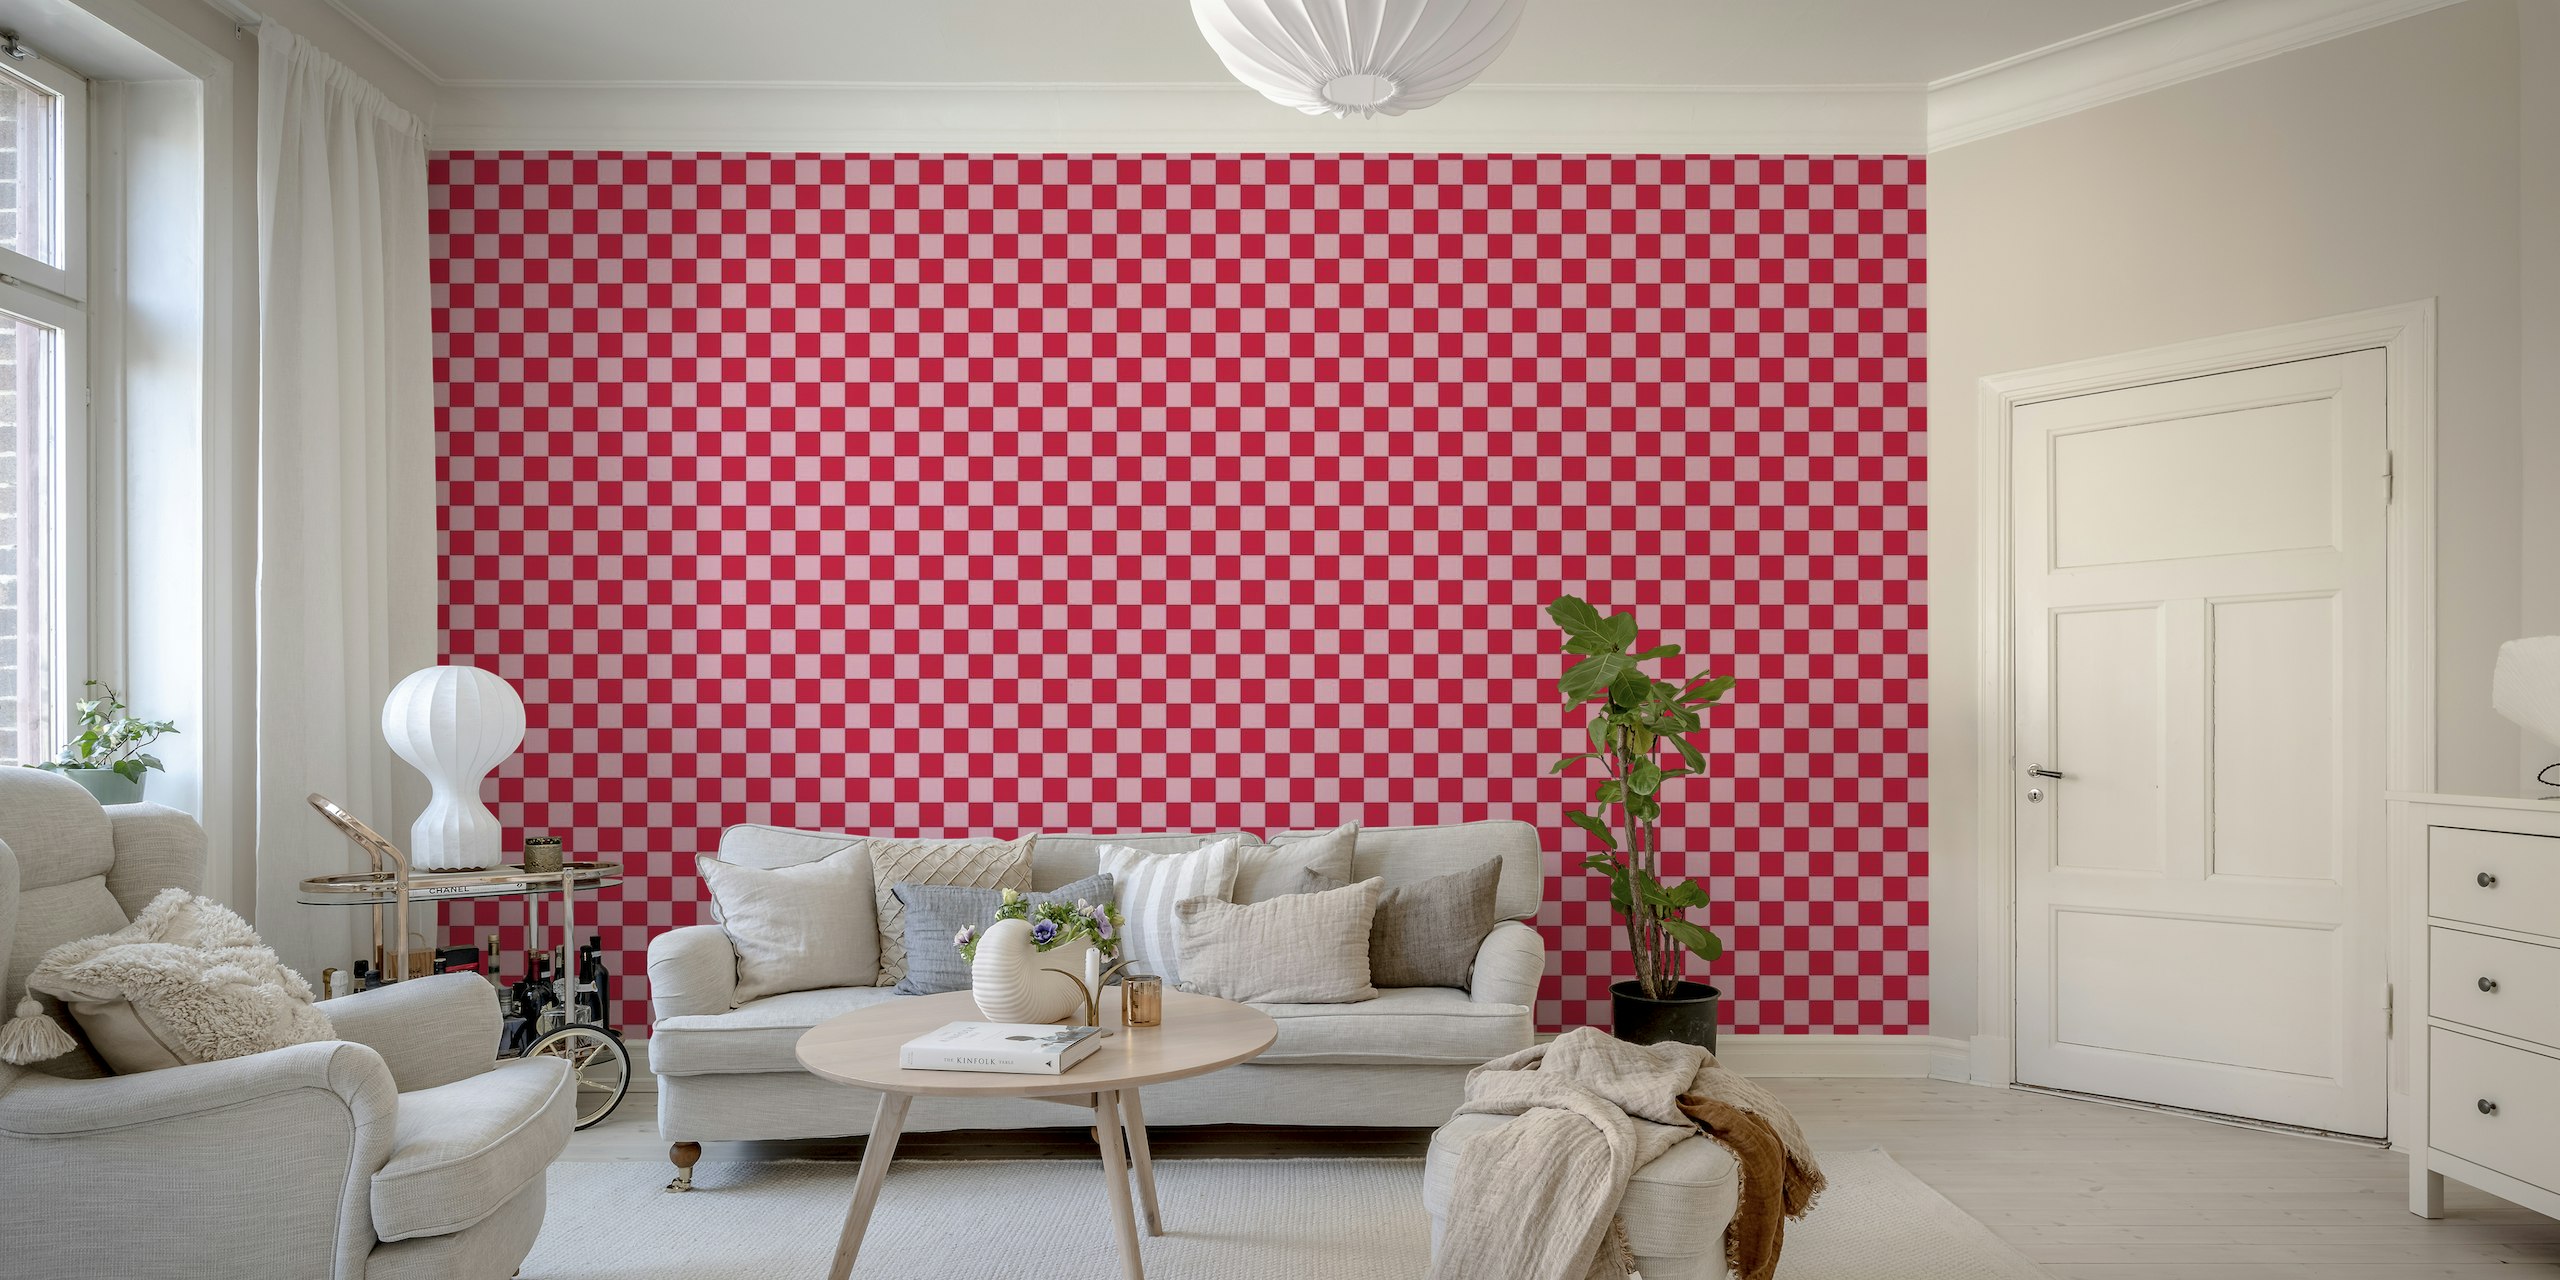 Checkerboard - Pink and Red behang